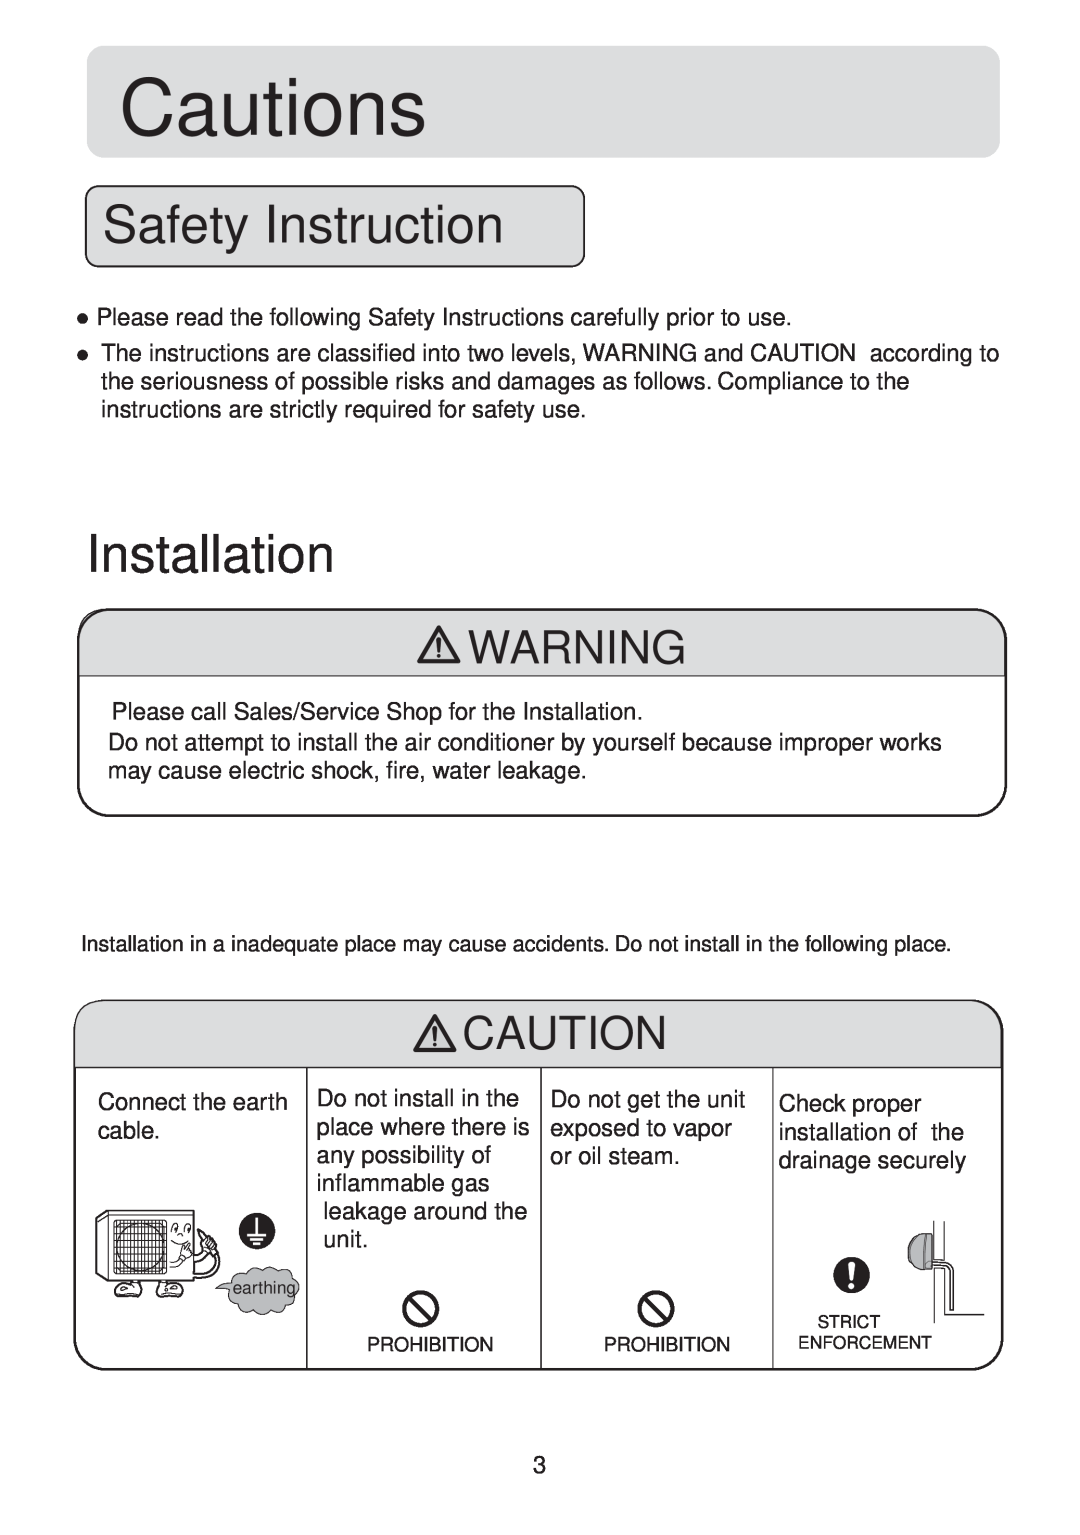 Haier HSU-07HV03, HSU-09HV03, HSU-12HV03, HSU-18HV03, HSU-22HV03, HSU-12HVB03 Safety Instruction, Installation, Cautions 